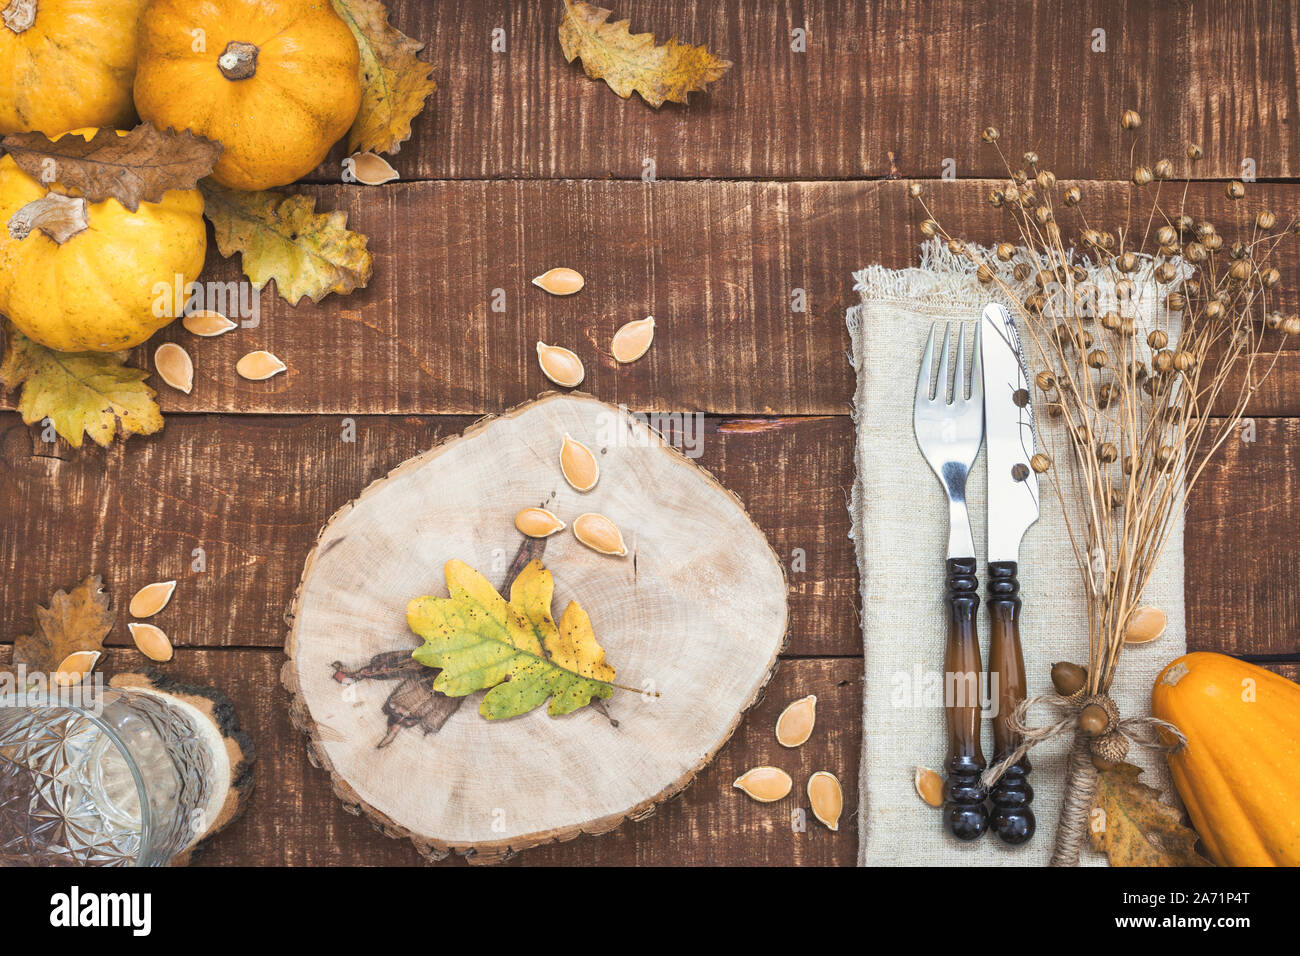 Rustic table setting for Thanksgiving diner with autumn leaves, acorns and pumpkins for decoration. Top view with copy space. Stock Photo